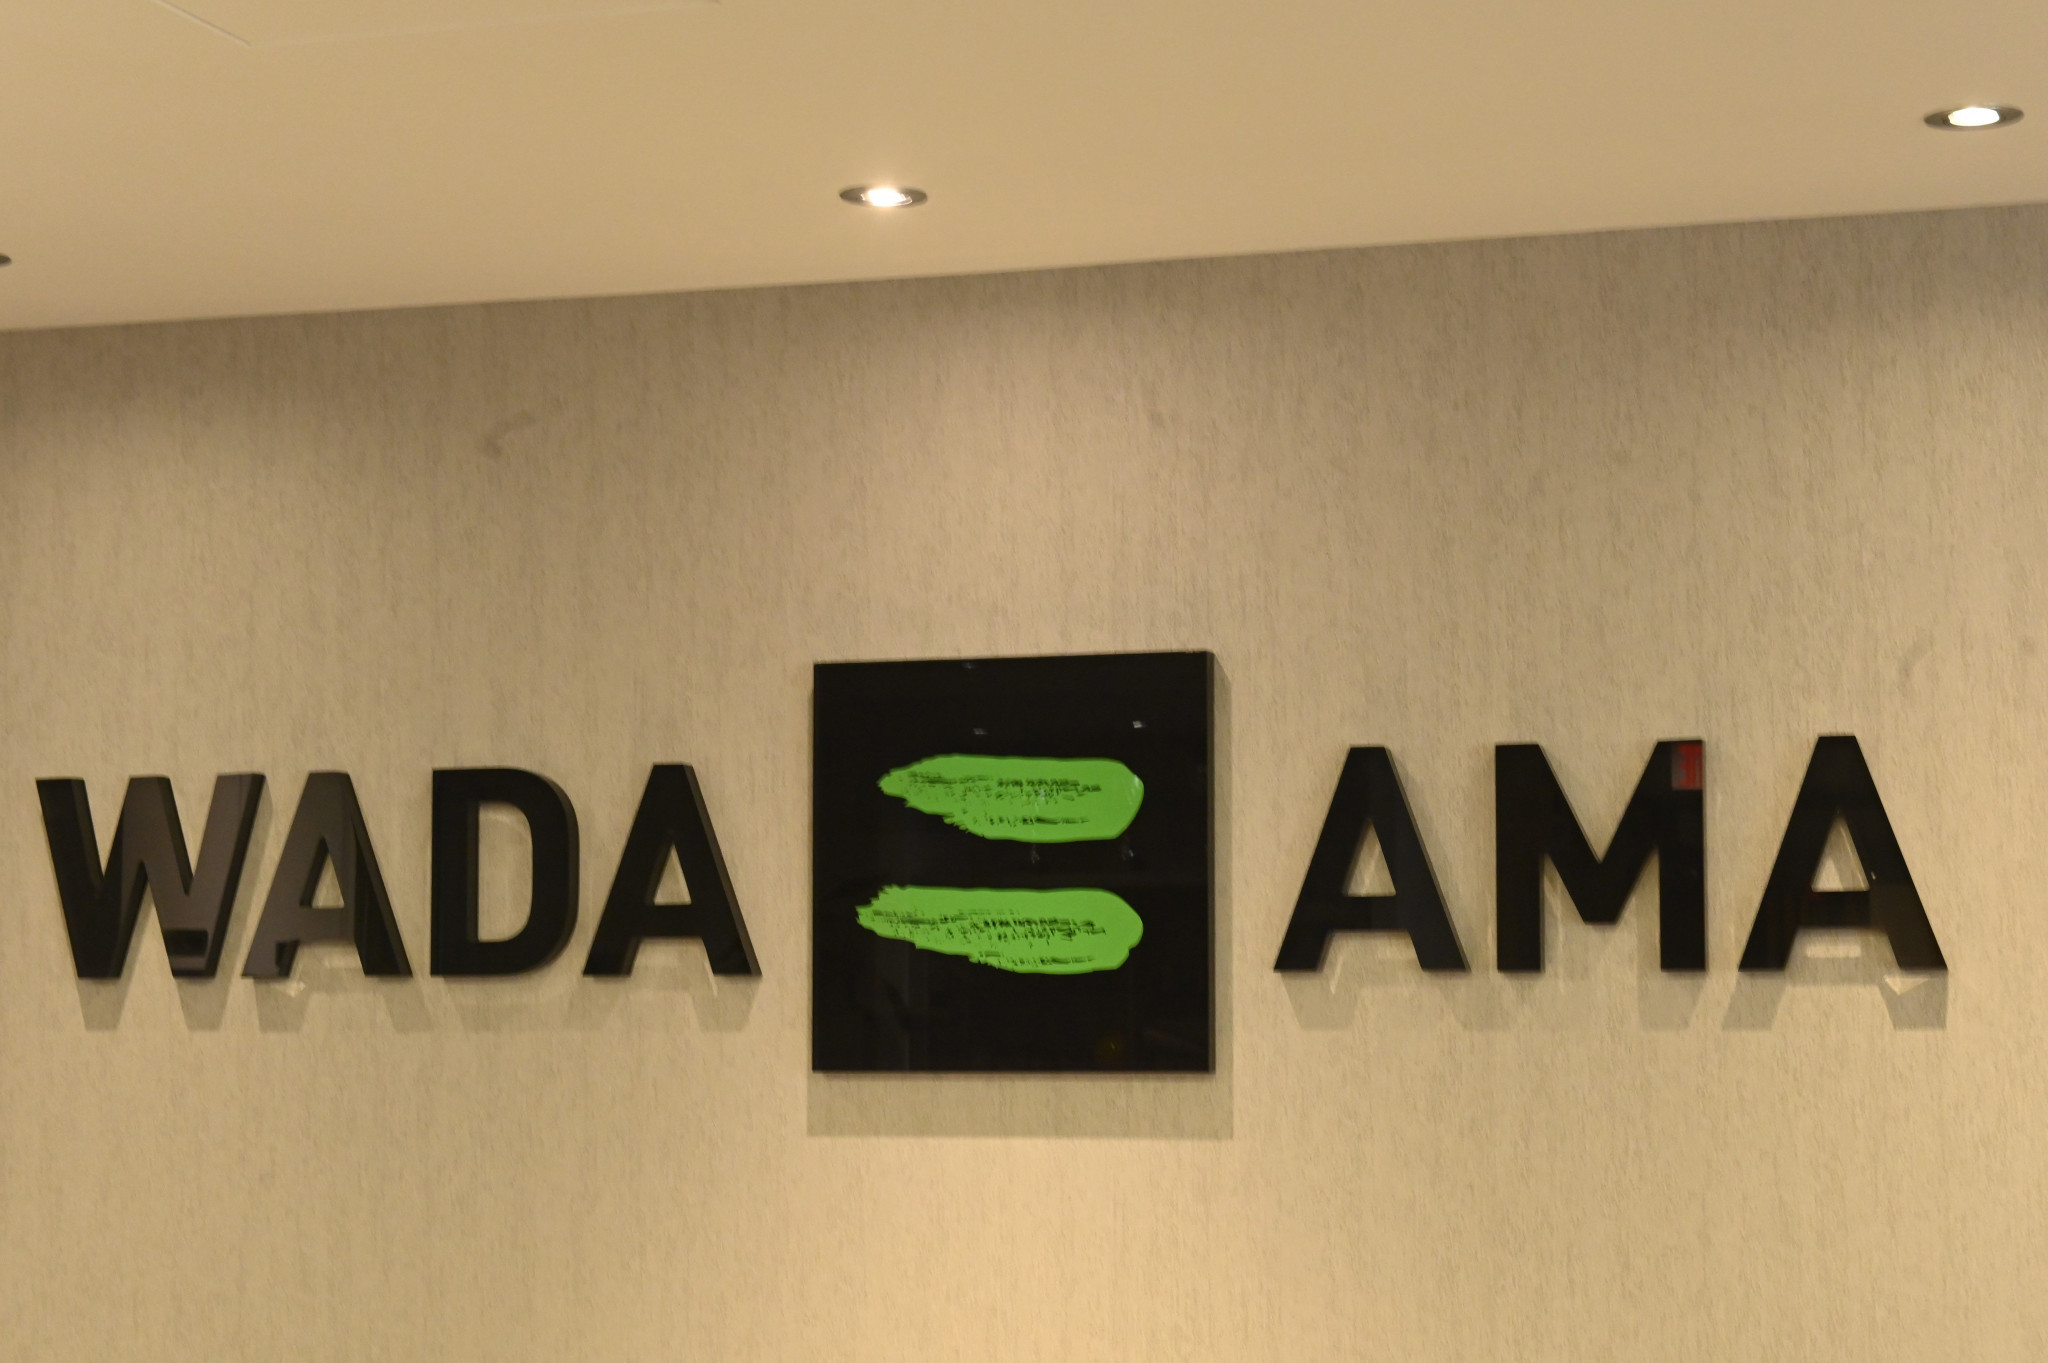 WADA invites candidates to apply for new independent ethics officer role